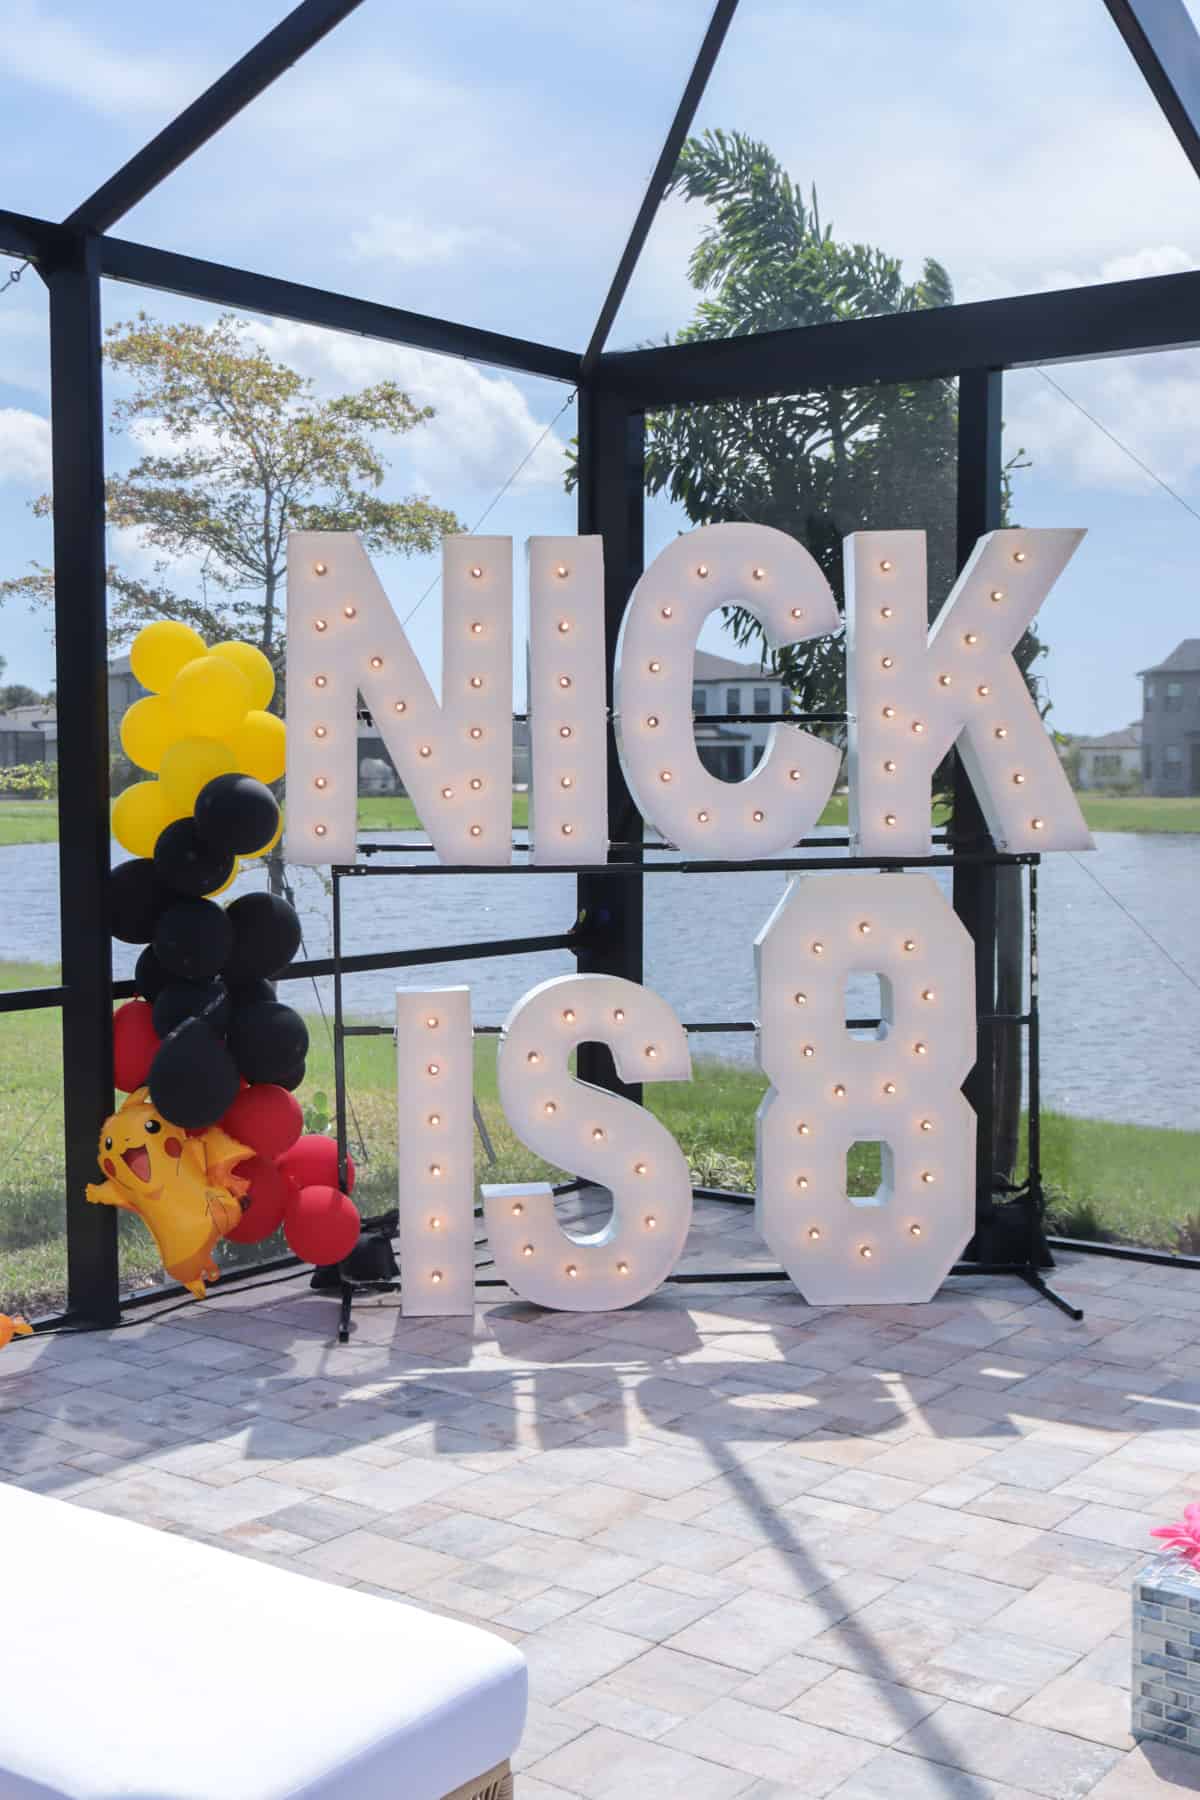 Light letters stacked spelling "nick is 8".